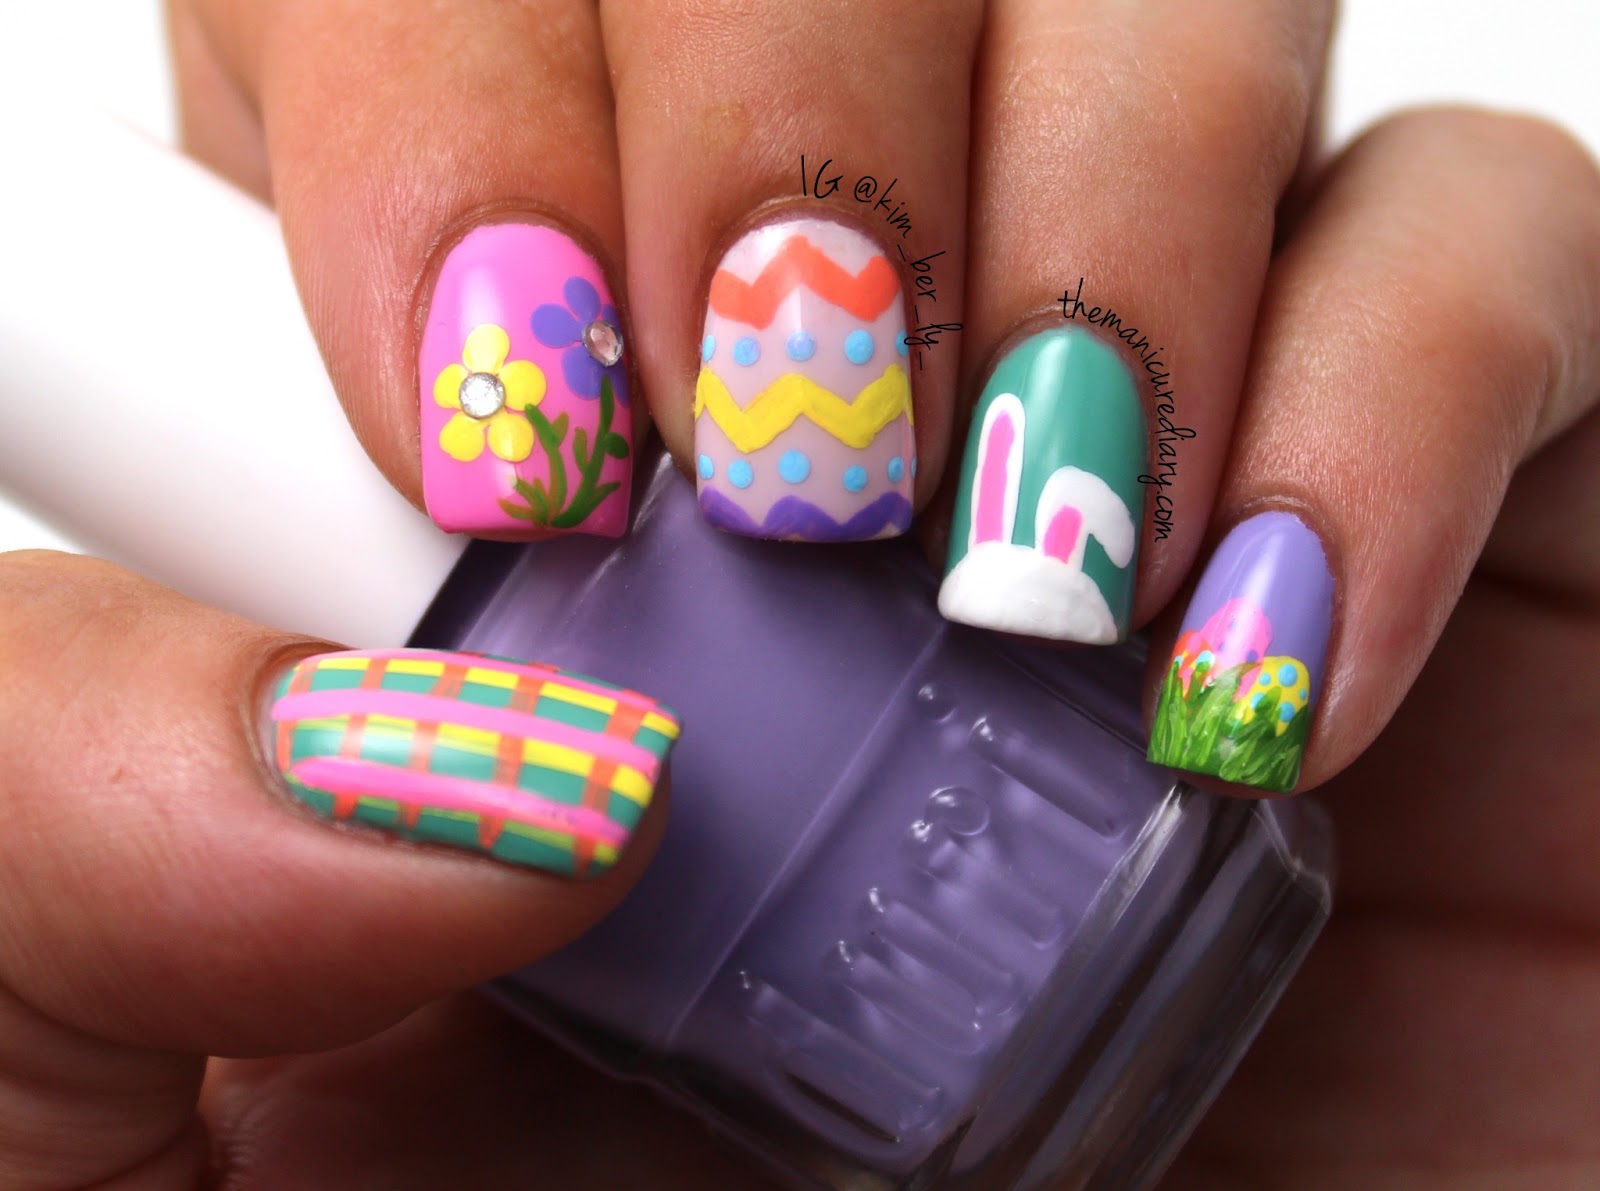 15 of The Best Easter Nail Designs.